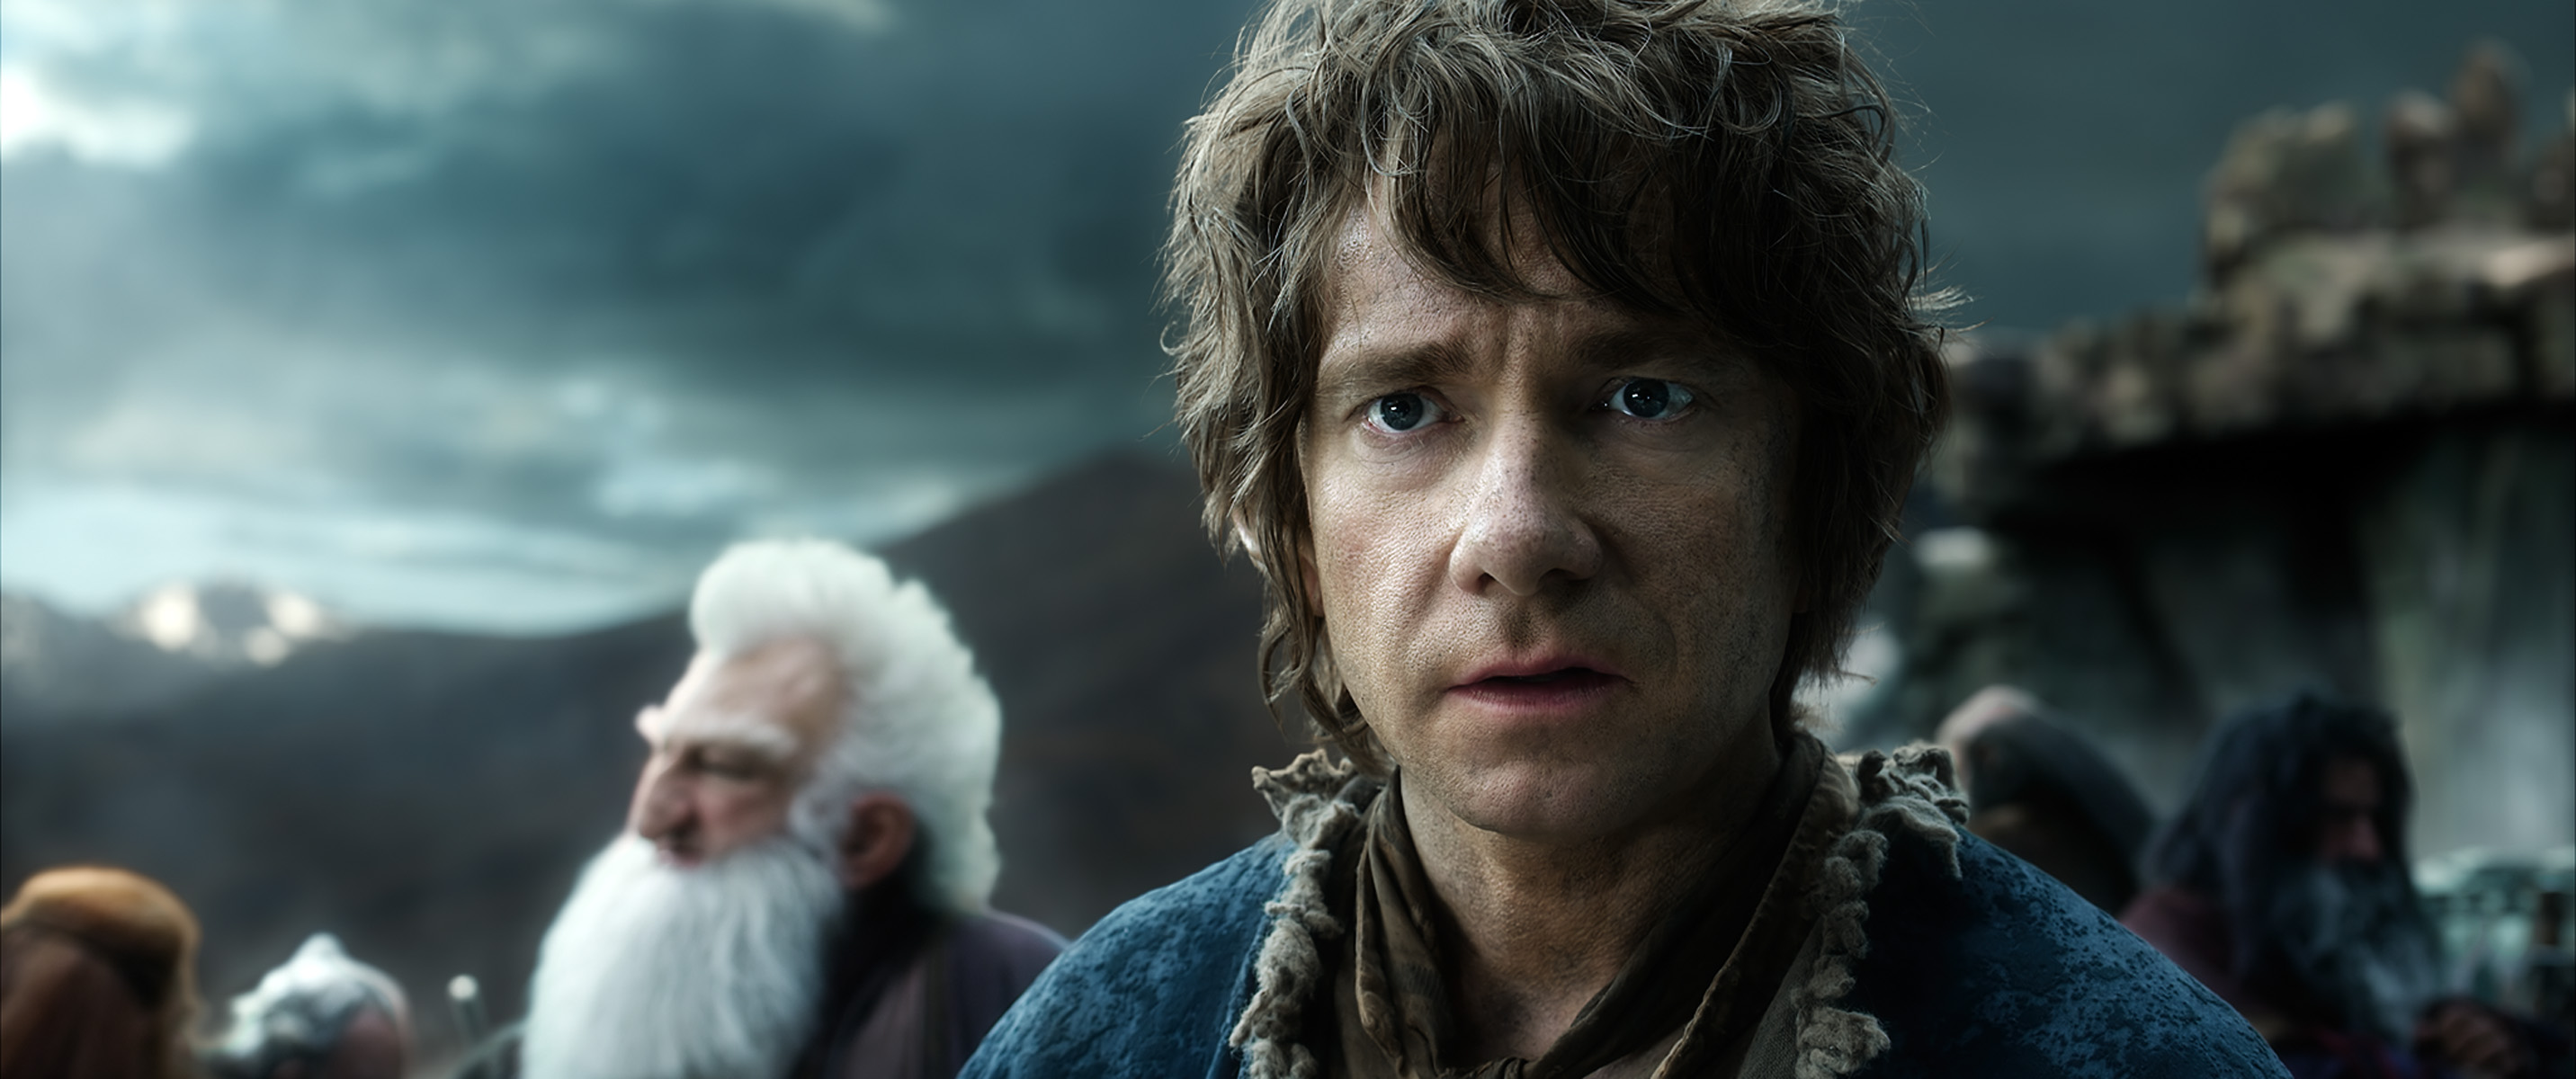 the-hobbit-the-battle-of-the-five-armies